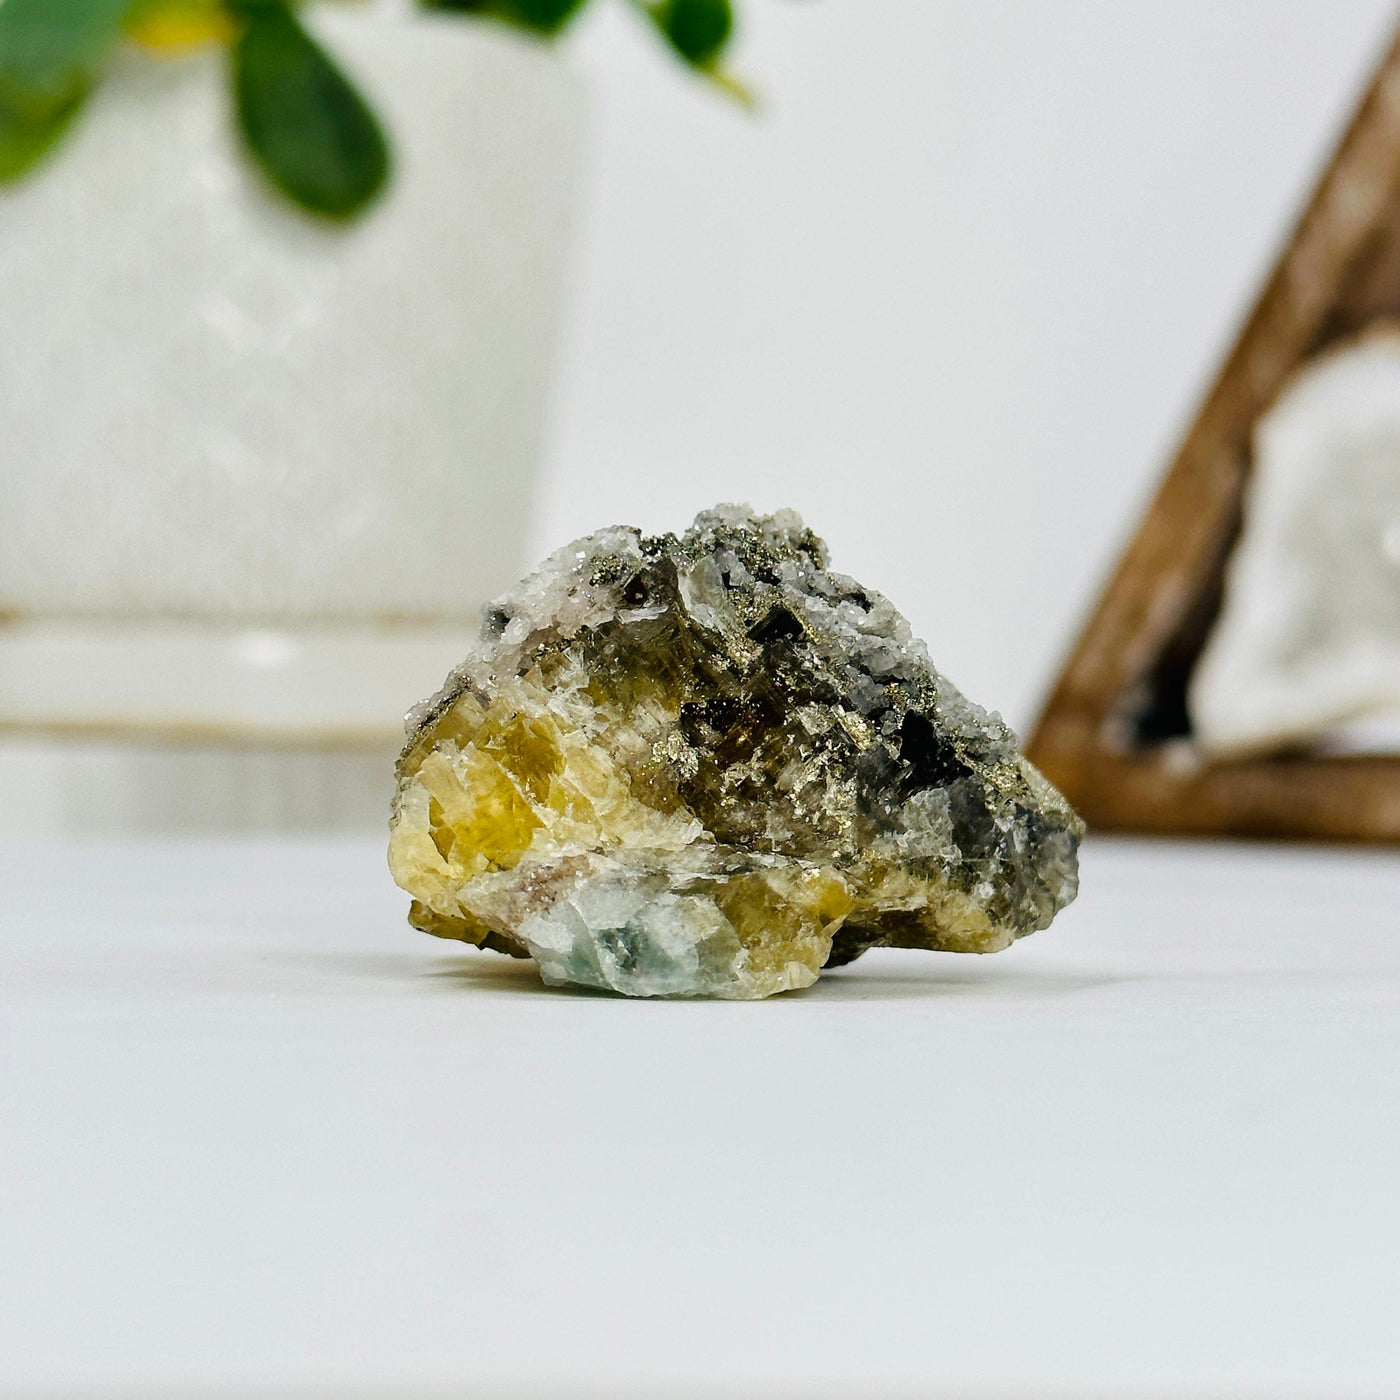 epidote with pyrite growth with decorations in the background